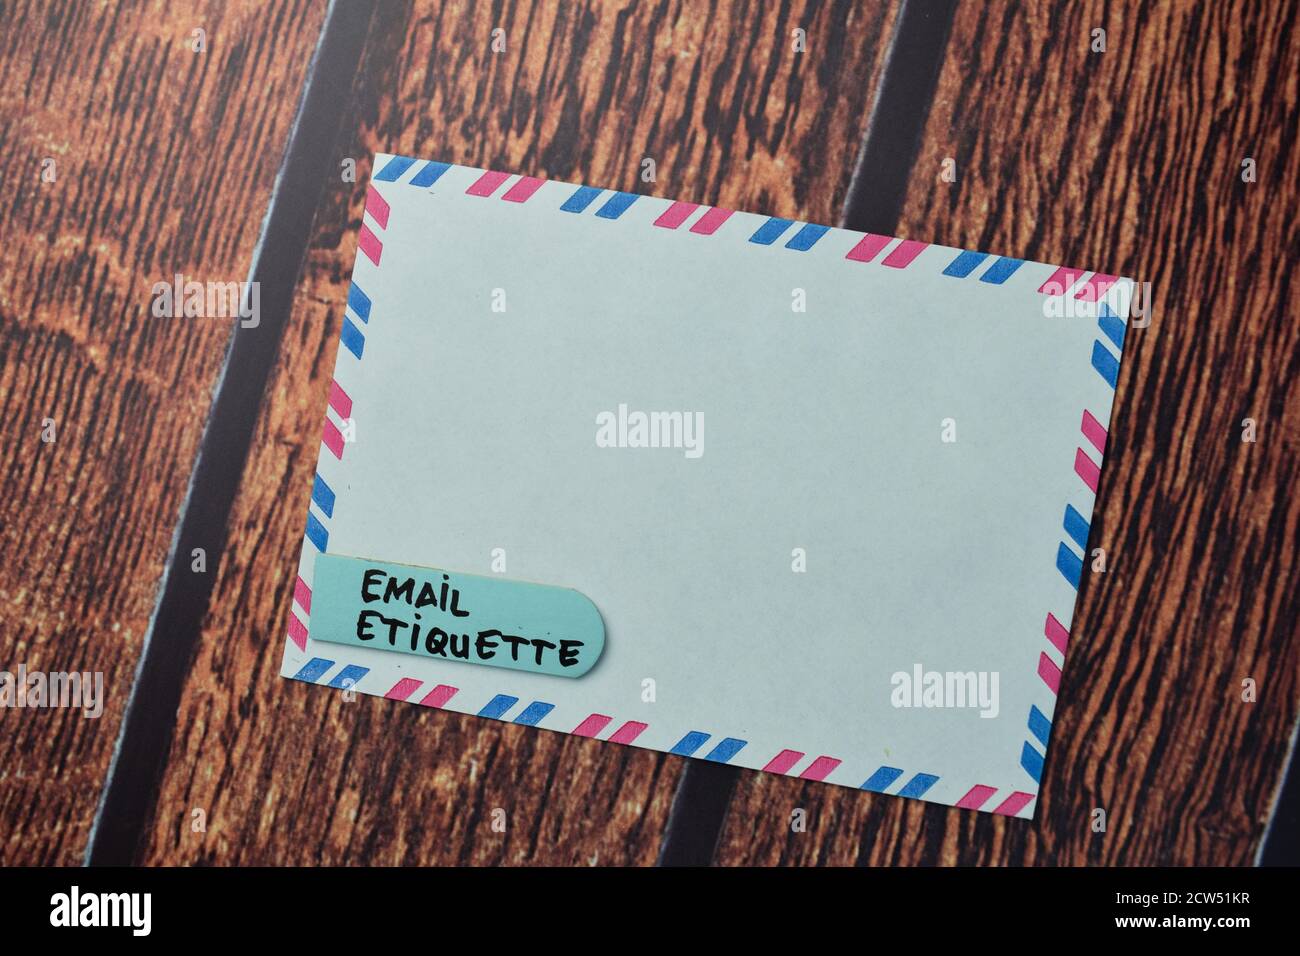 Email Etiquette write on a white envelope isolated on office desk. Stock Photo